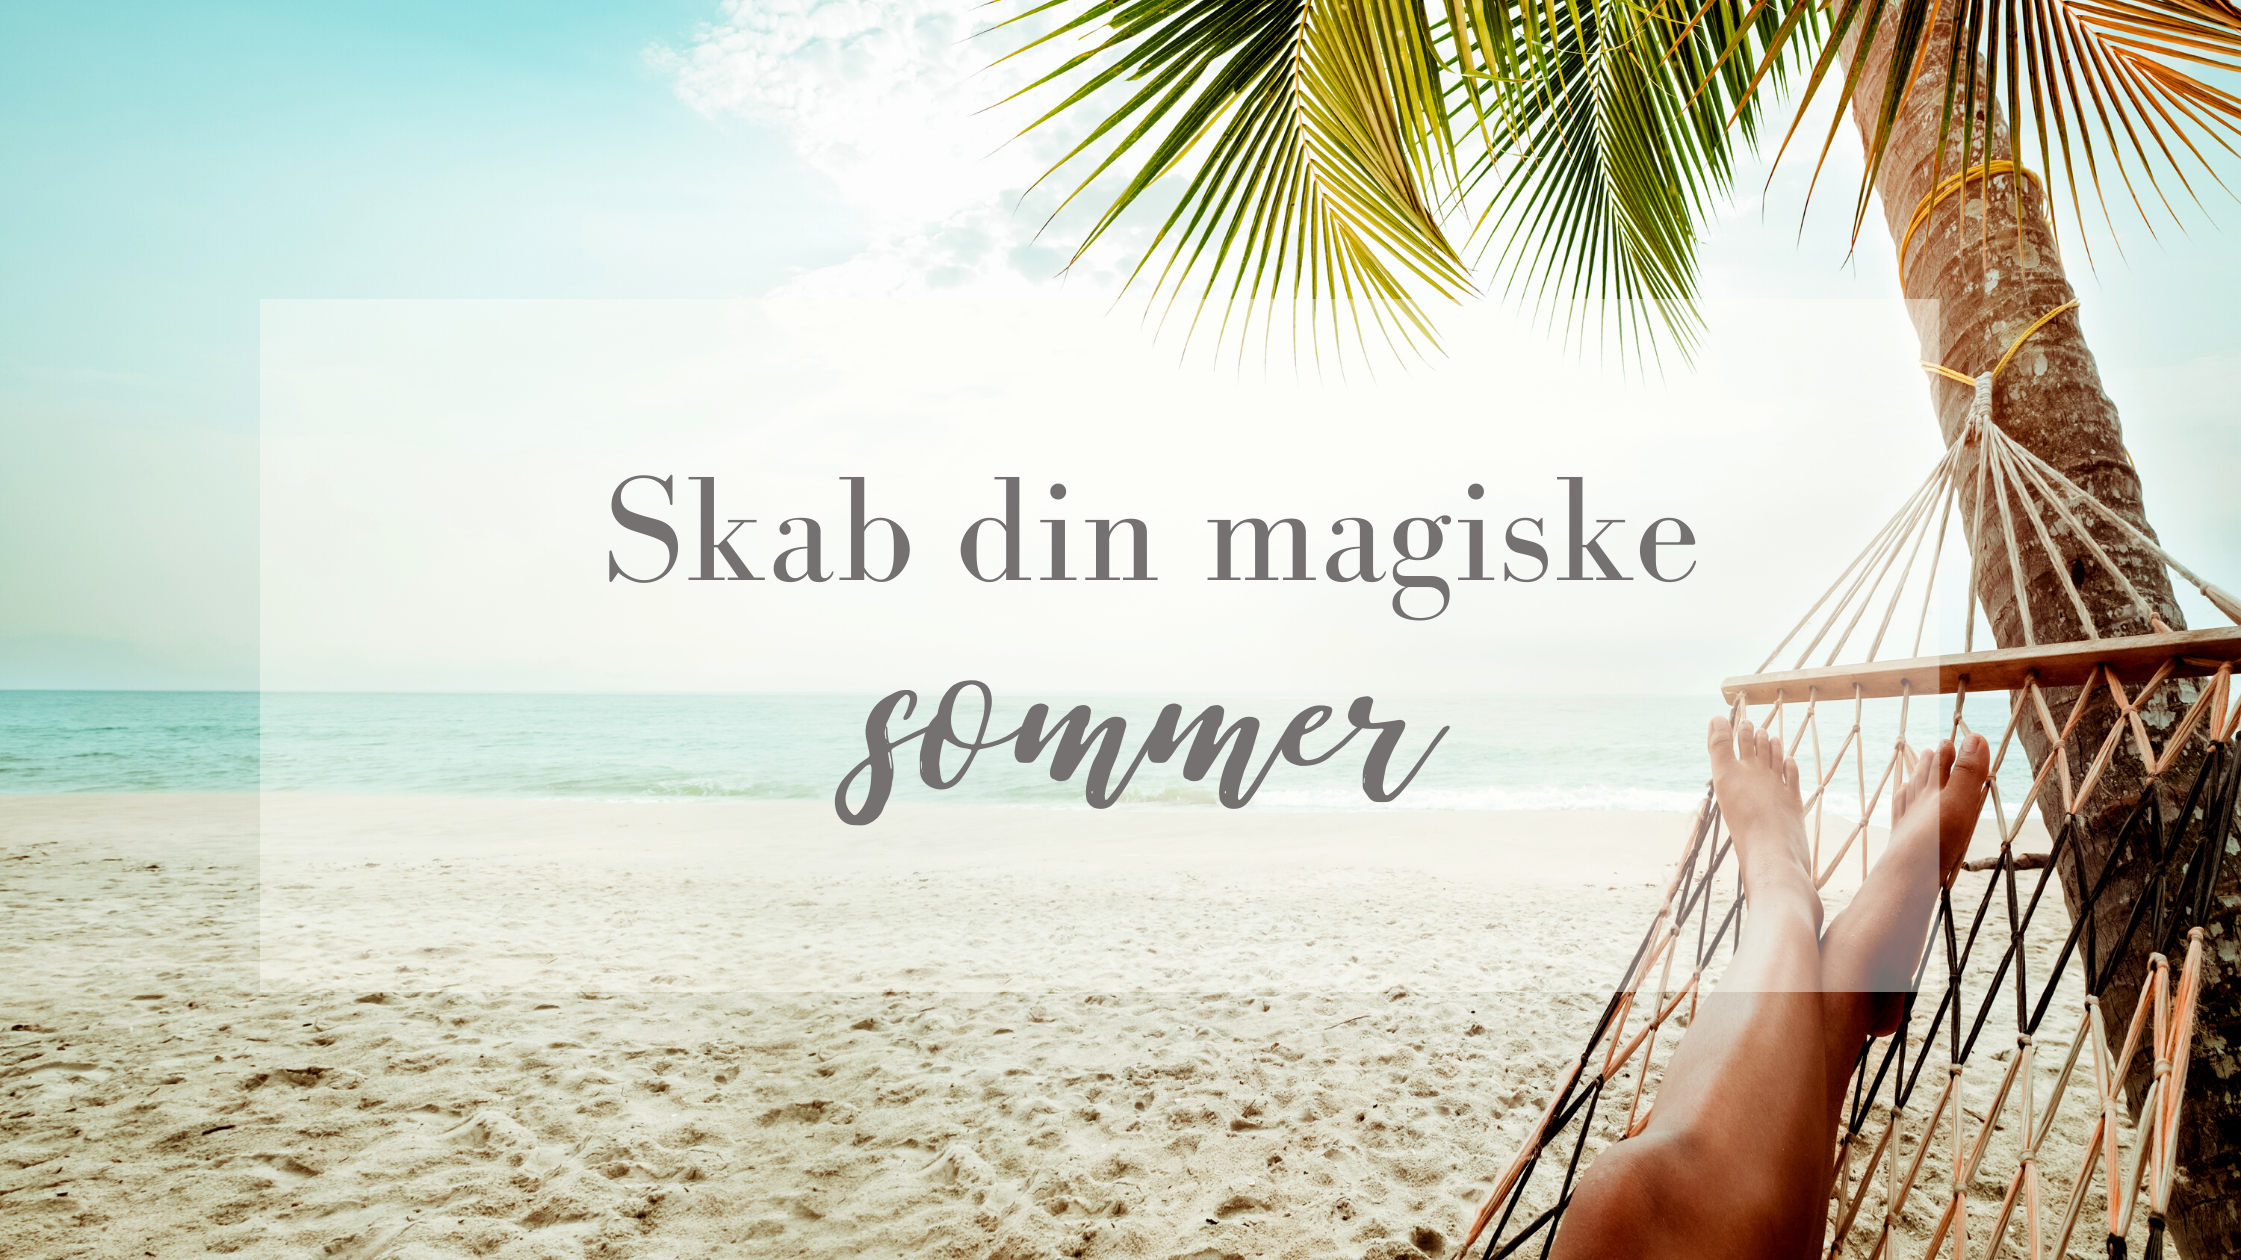 You are currently viewing Skab din magiske sommer